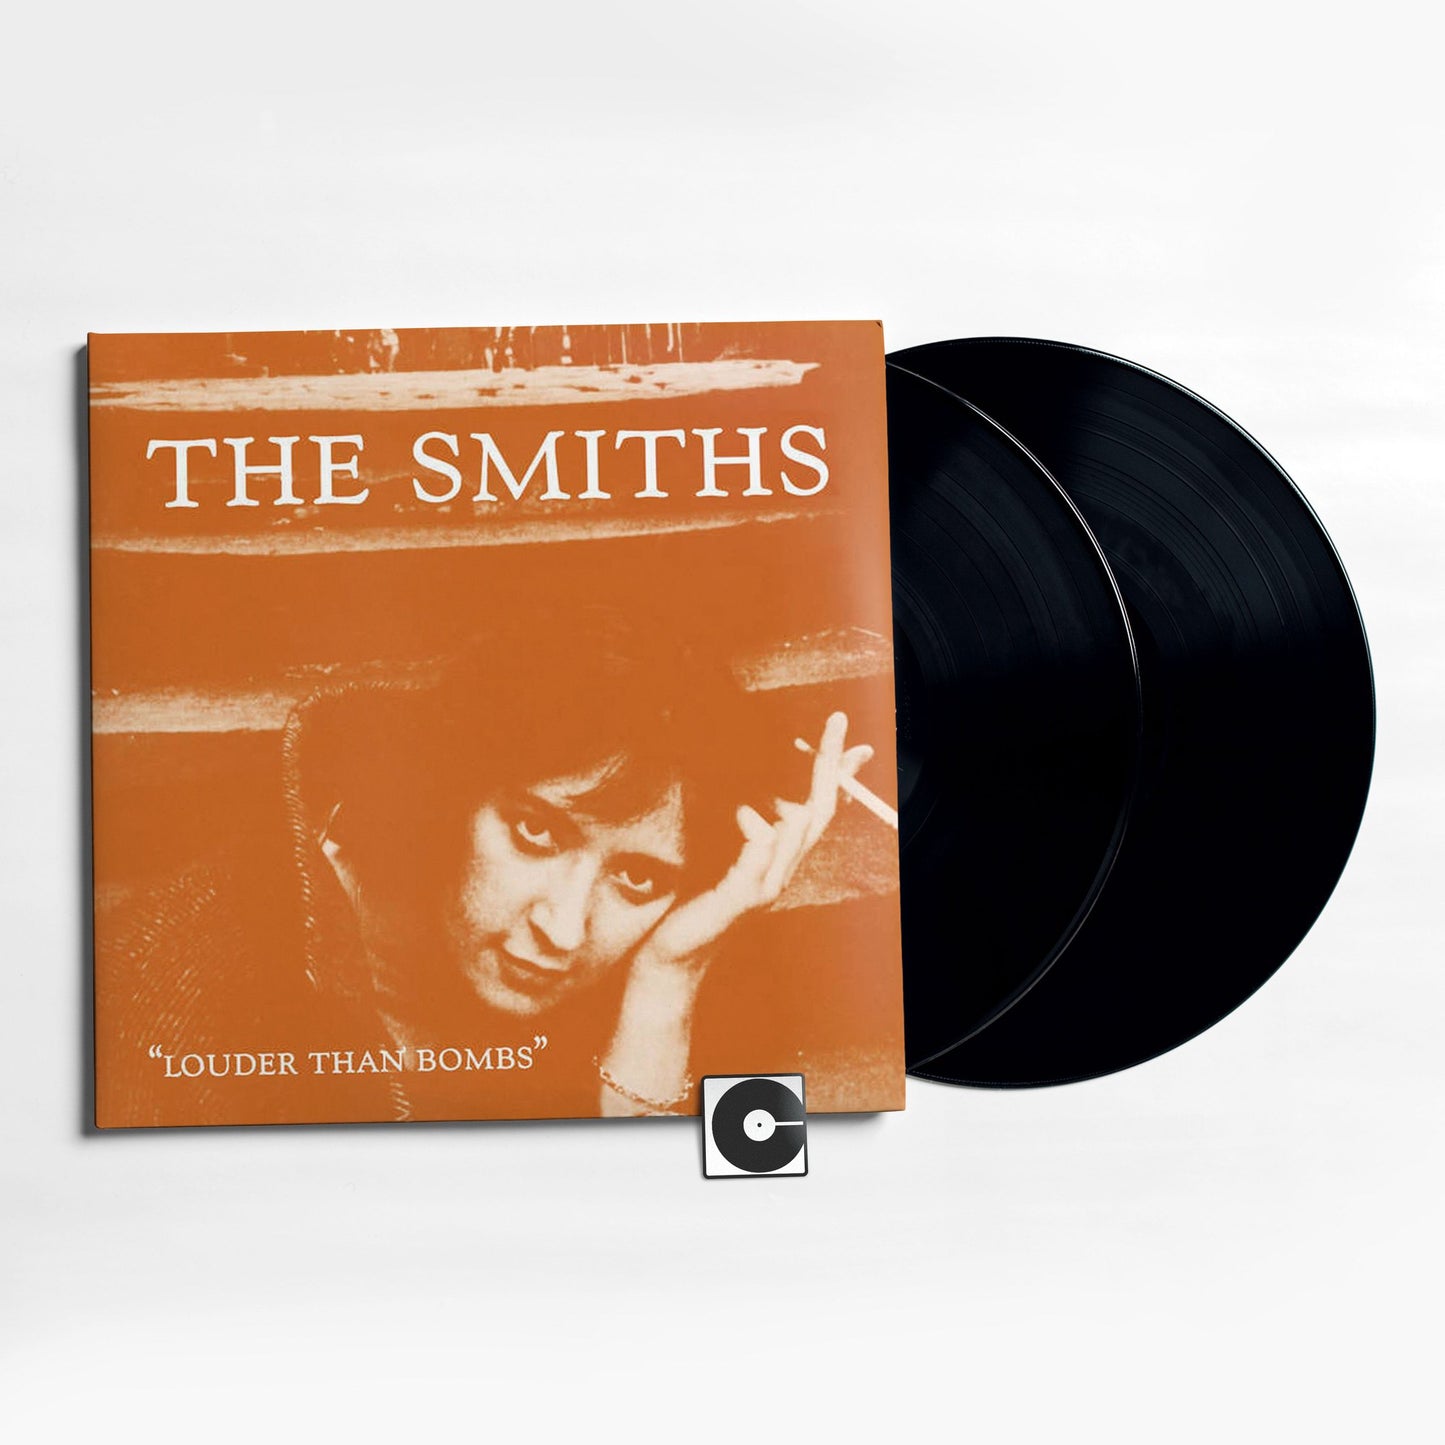 The Smiths - "Louder Than Bombs"